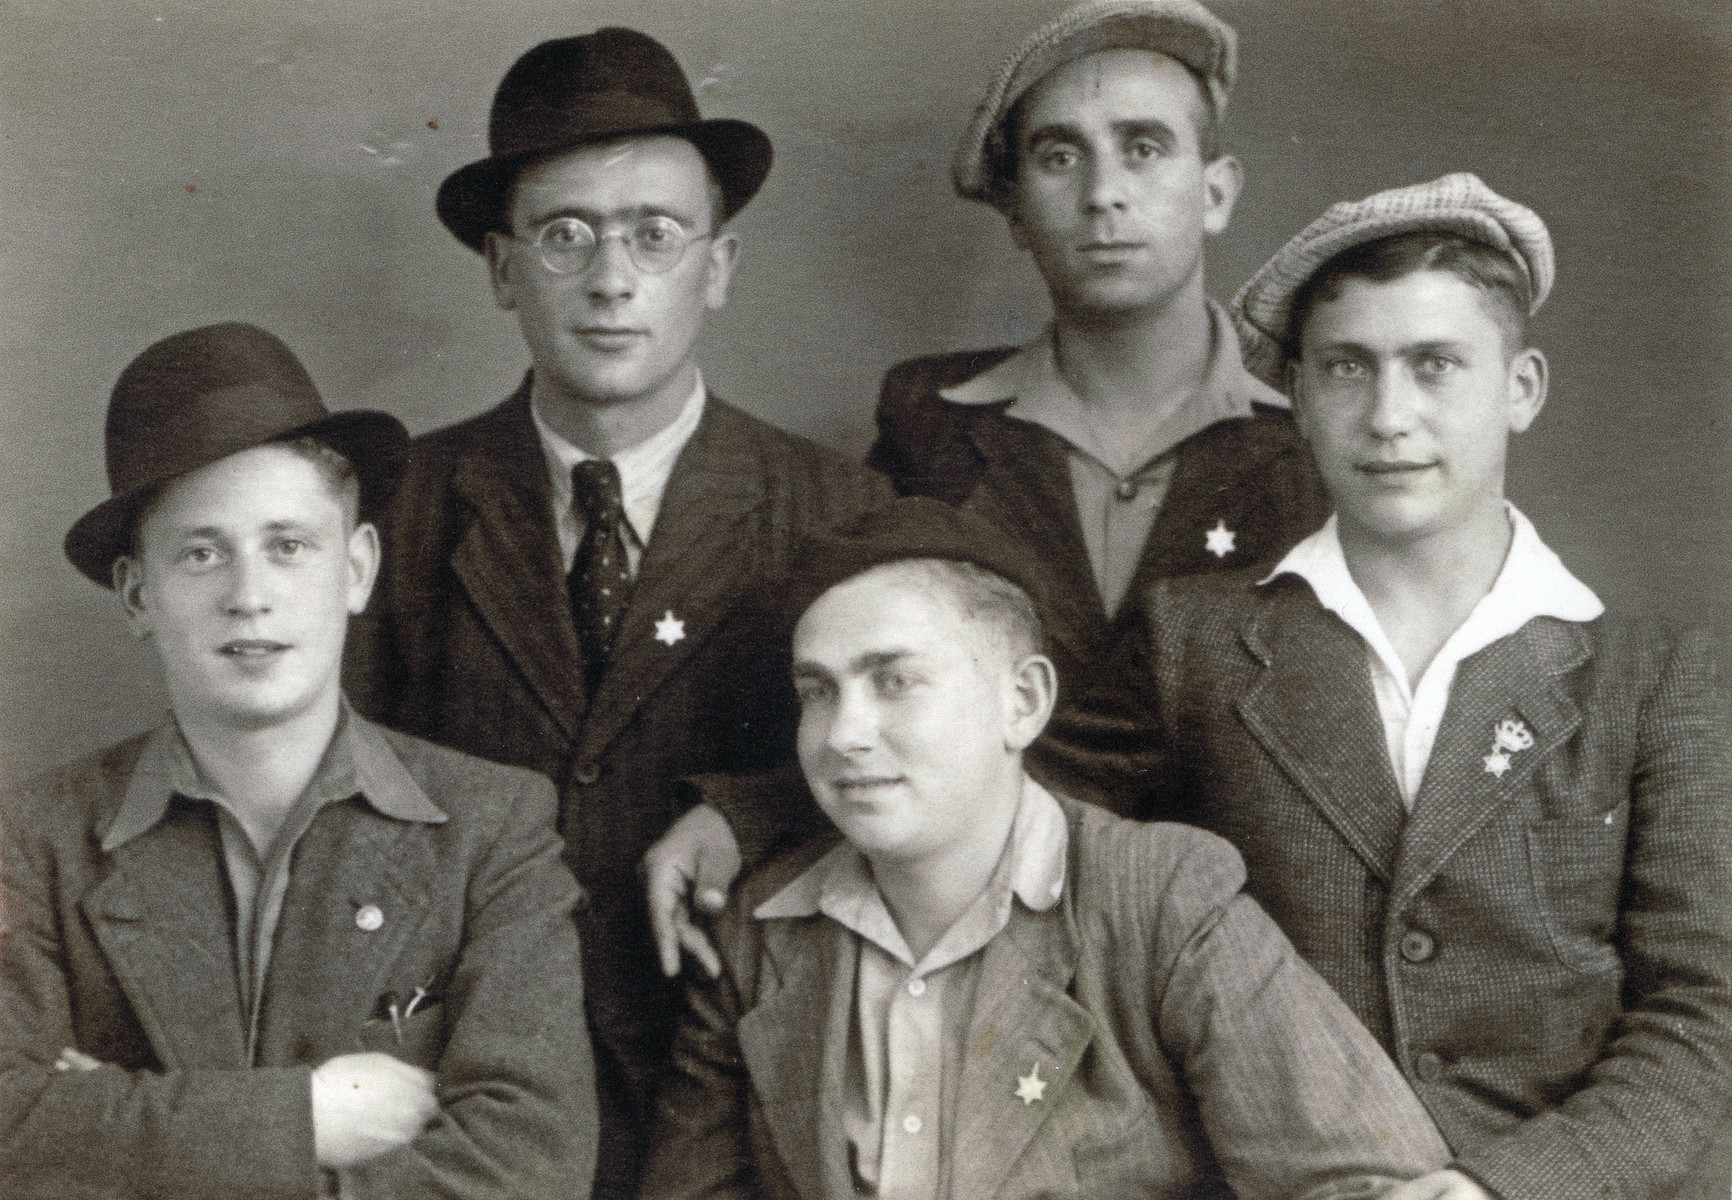 Group portrait of religious Jewish youth in an unidentified displaced persons camp.

Among those pictured are Moshe Braunfeld (lower left) and Leibish Braunfeld (right).  They sent this photograph to their sister Elissa in Palestine to prove they were still alive.